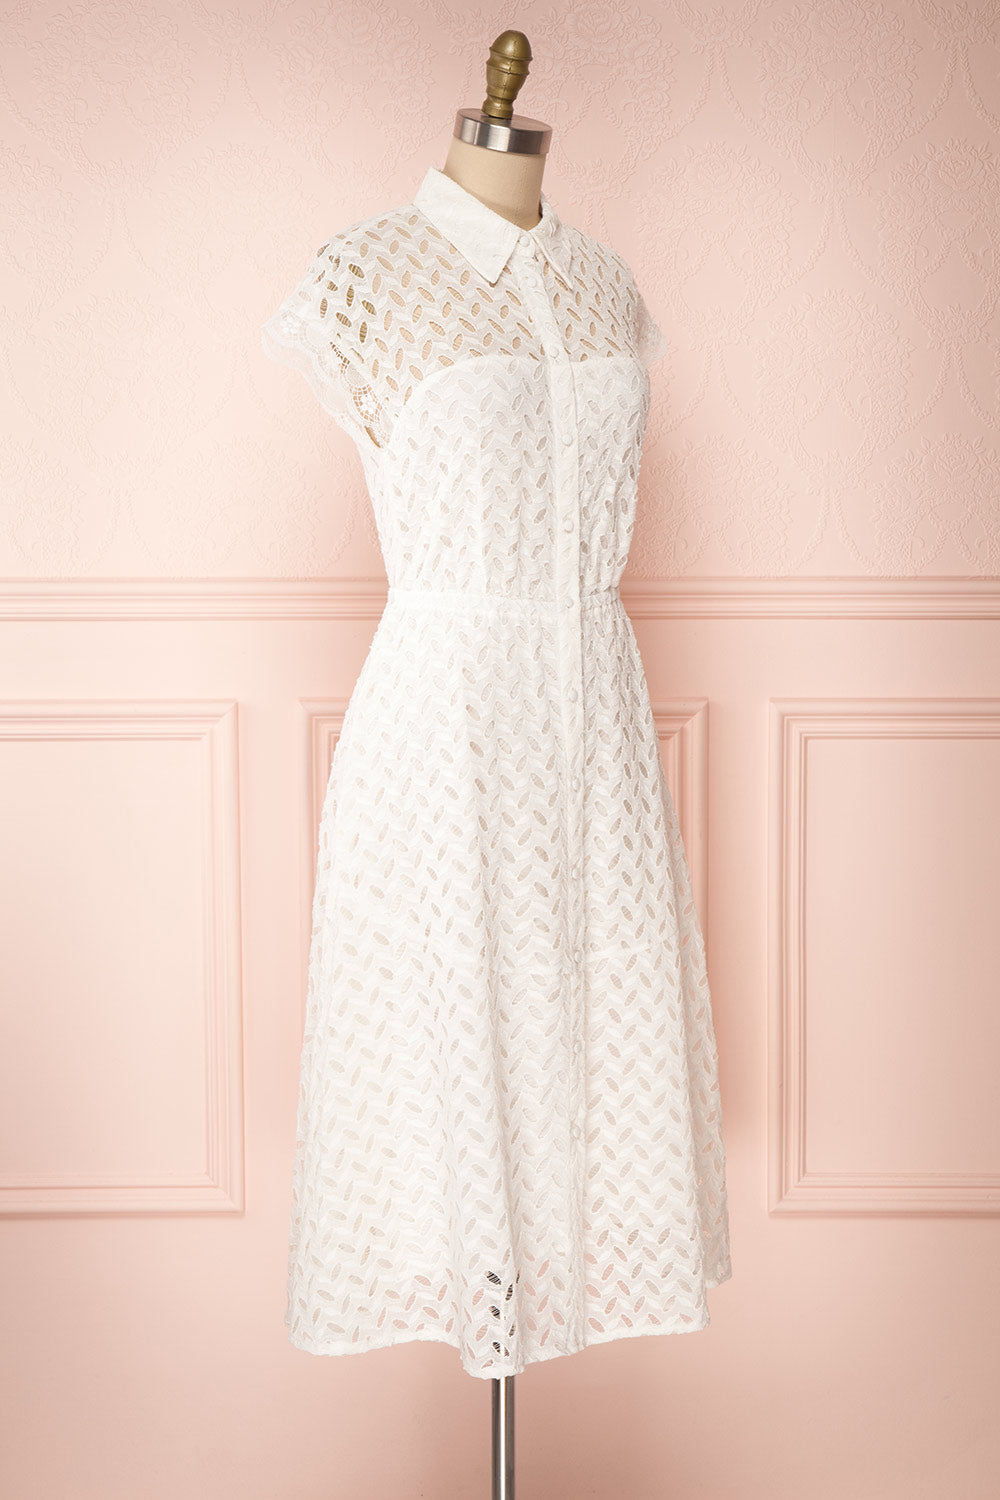 Goja White Lace Short Sleeve Midi Dress | Boutique 1861 side view 